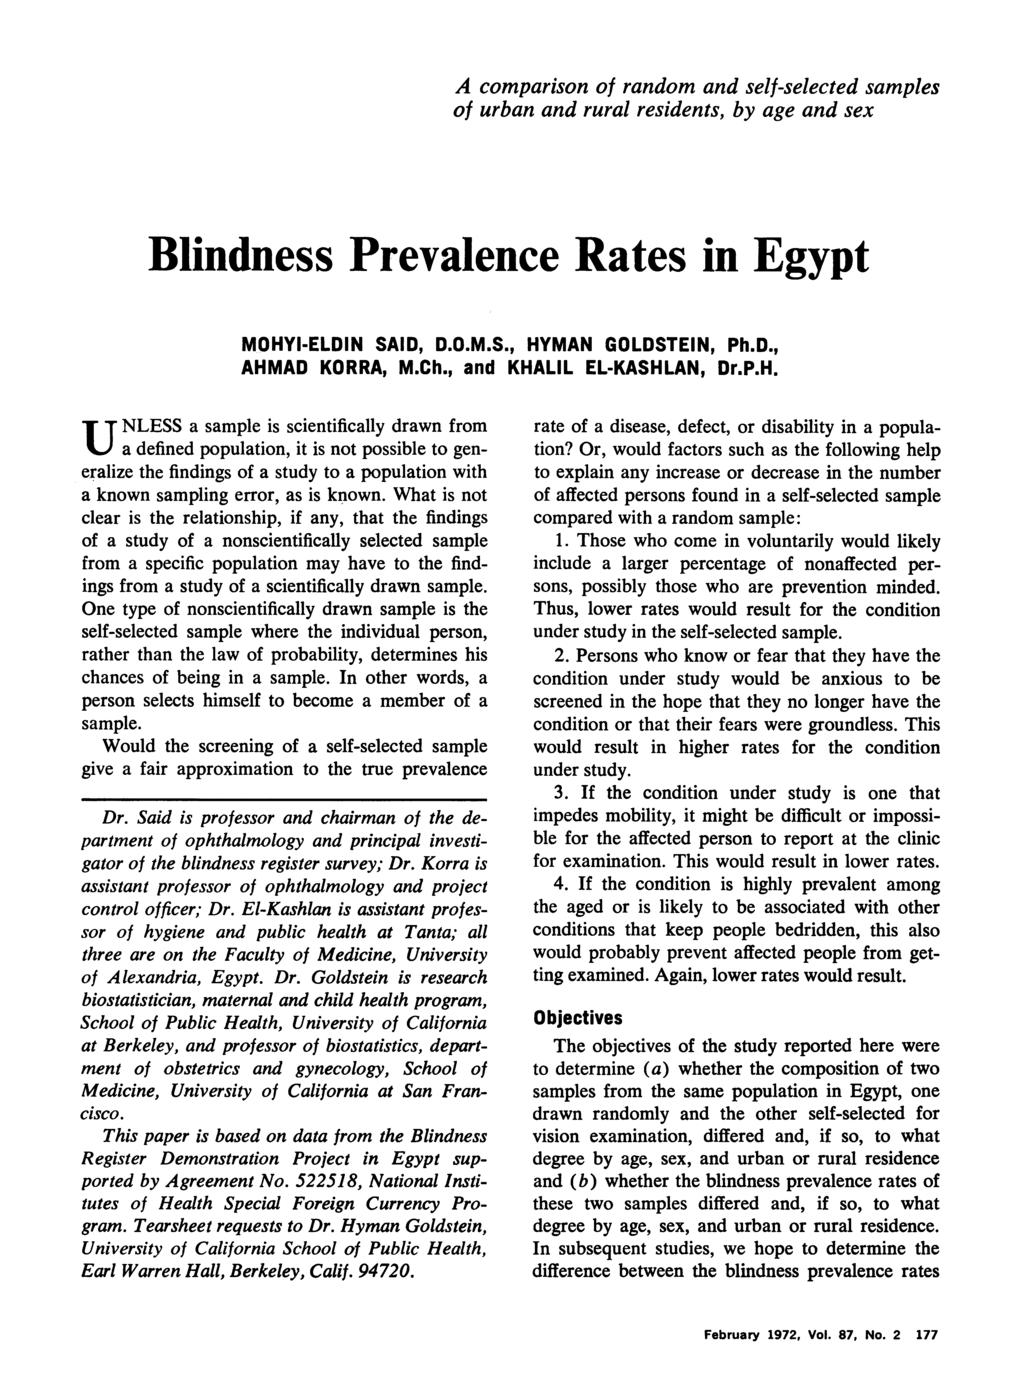 A comparison of random and self-selected samples of urban and rural residents, by age and sex Blindness Prevalence Rates in Egypt MOHYI-ELDIN SAID, D.O.M.S., HYMAN GOLDSTEIN, Ph.D., AHMAD KORRA, M.Ch.